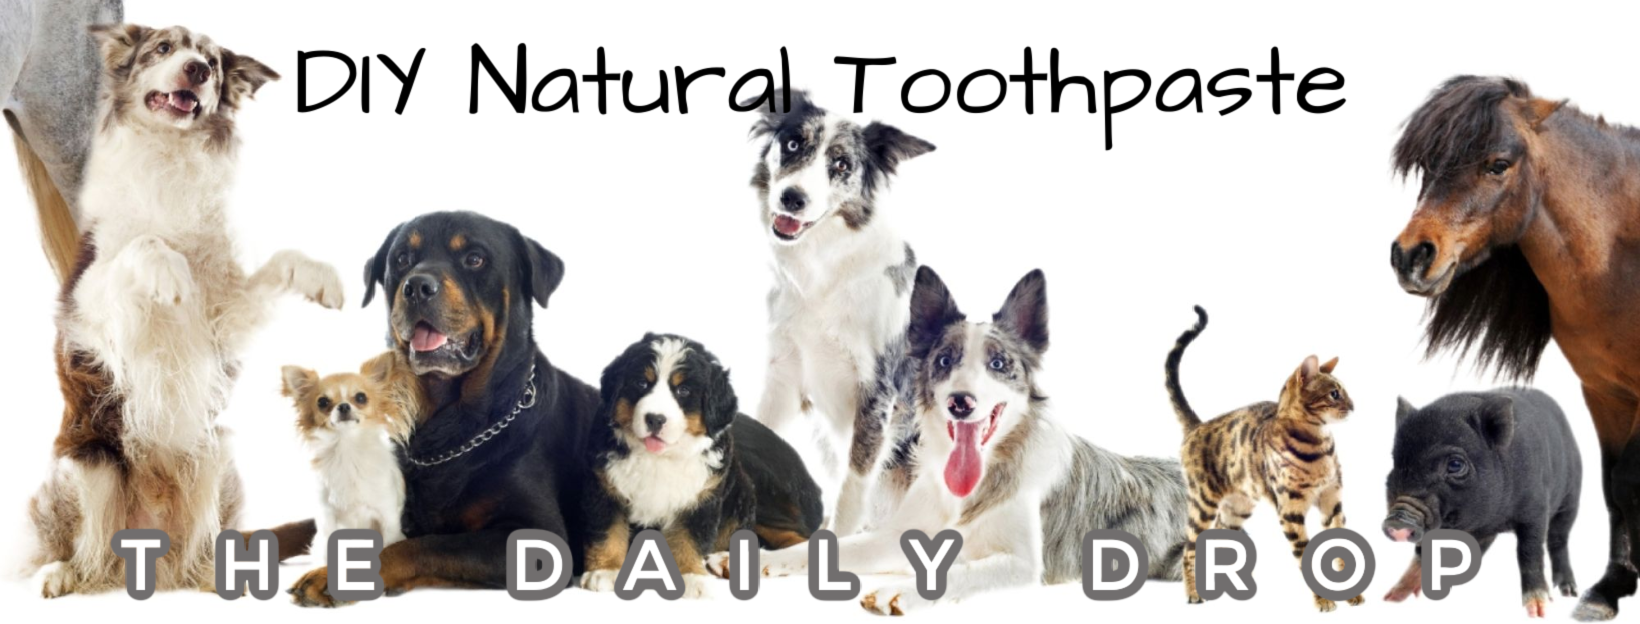 DIY Natural Toothpaste | From Sandy